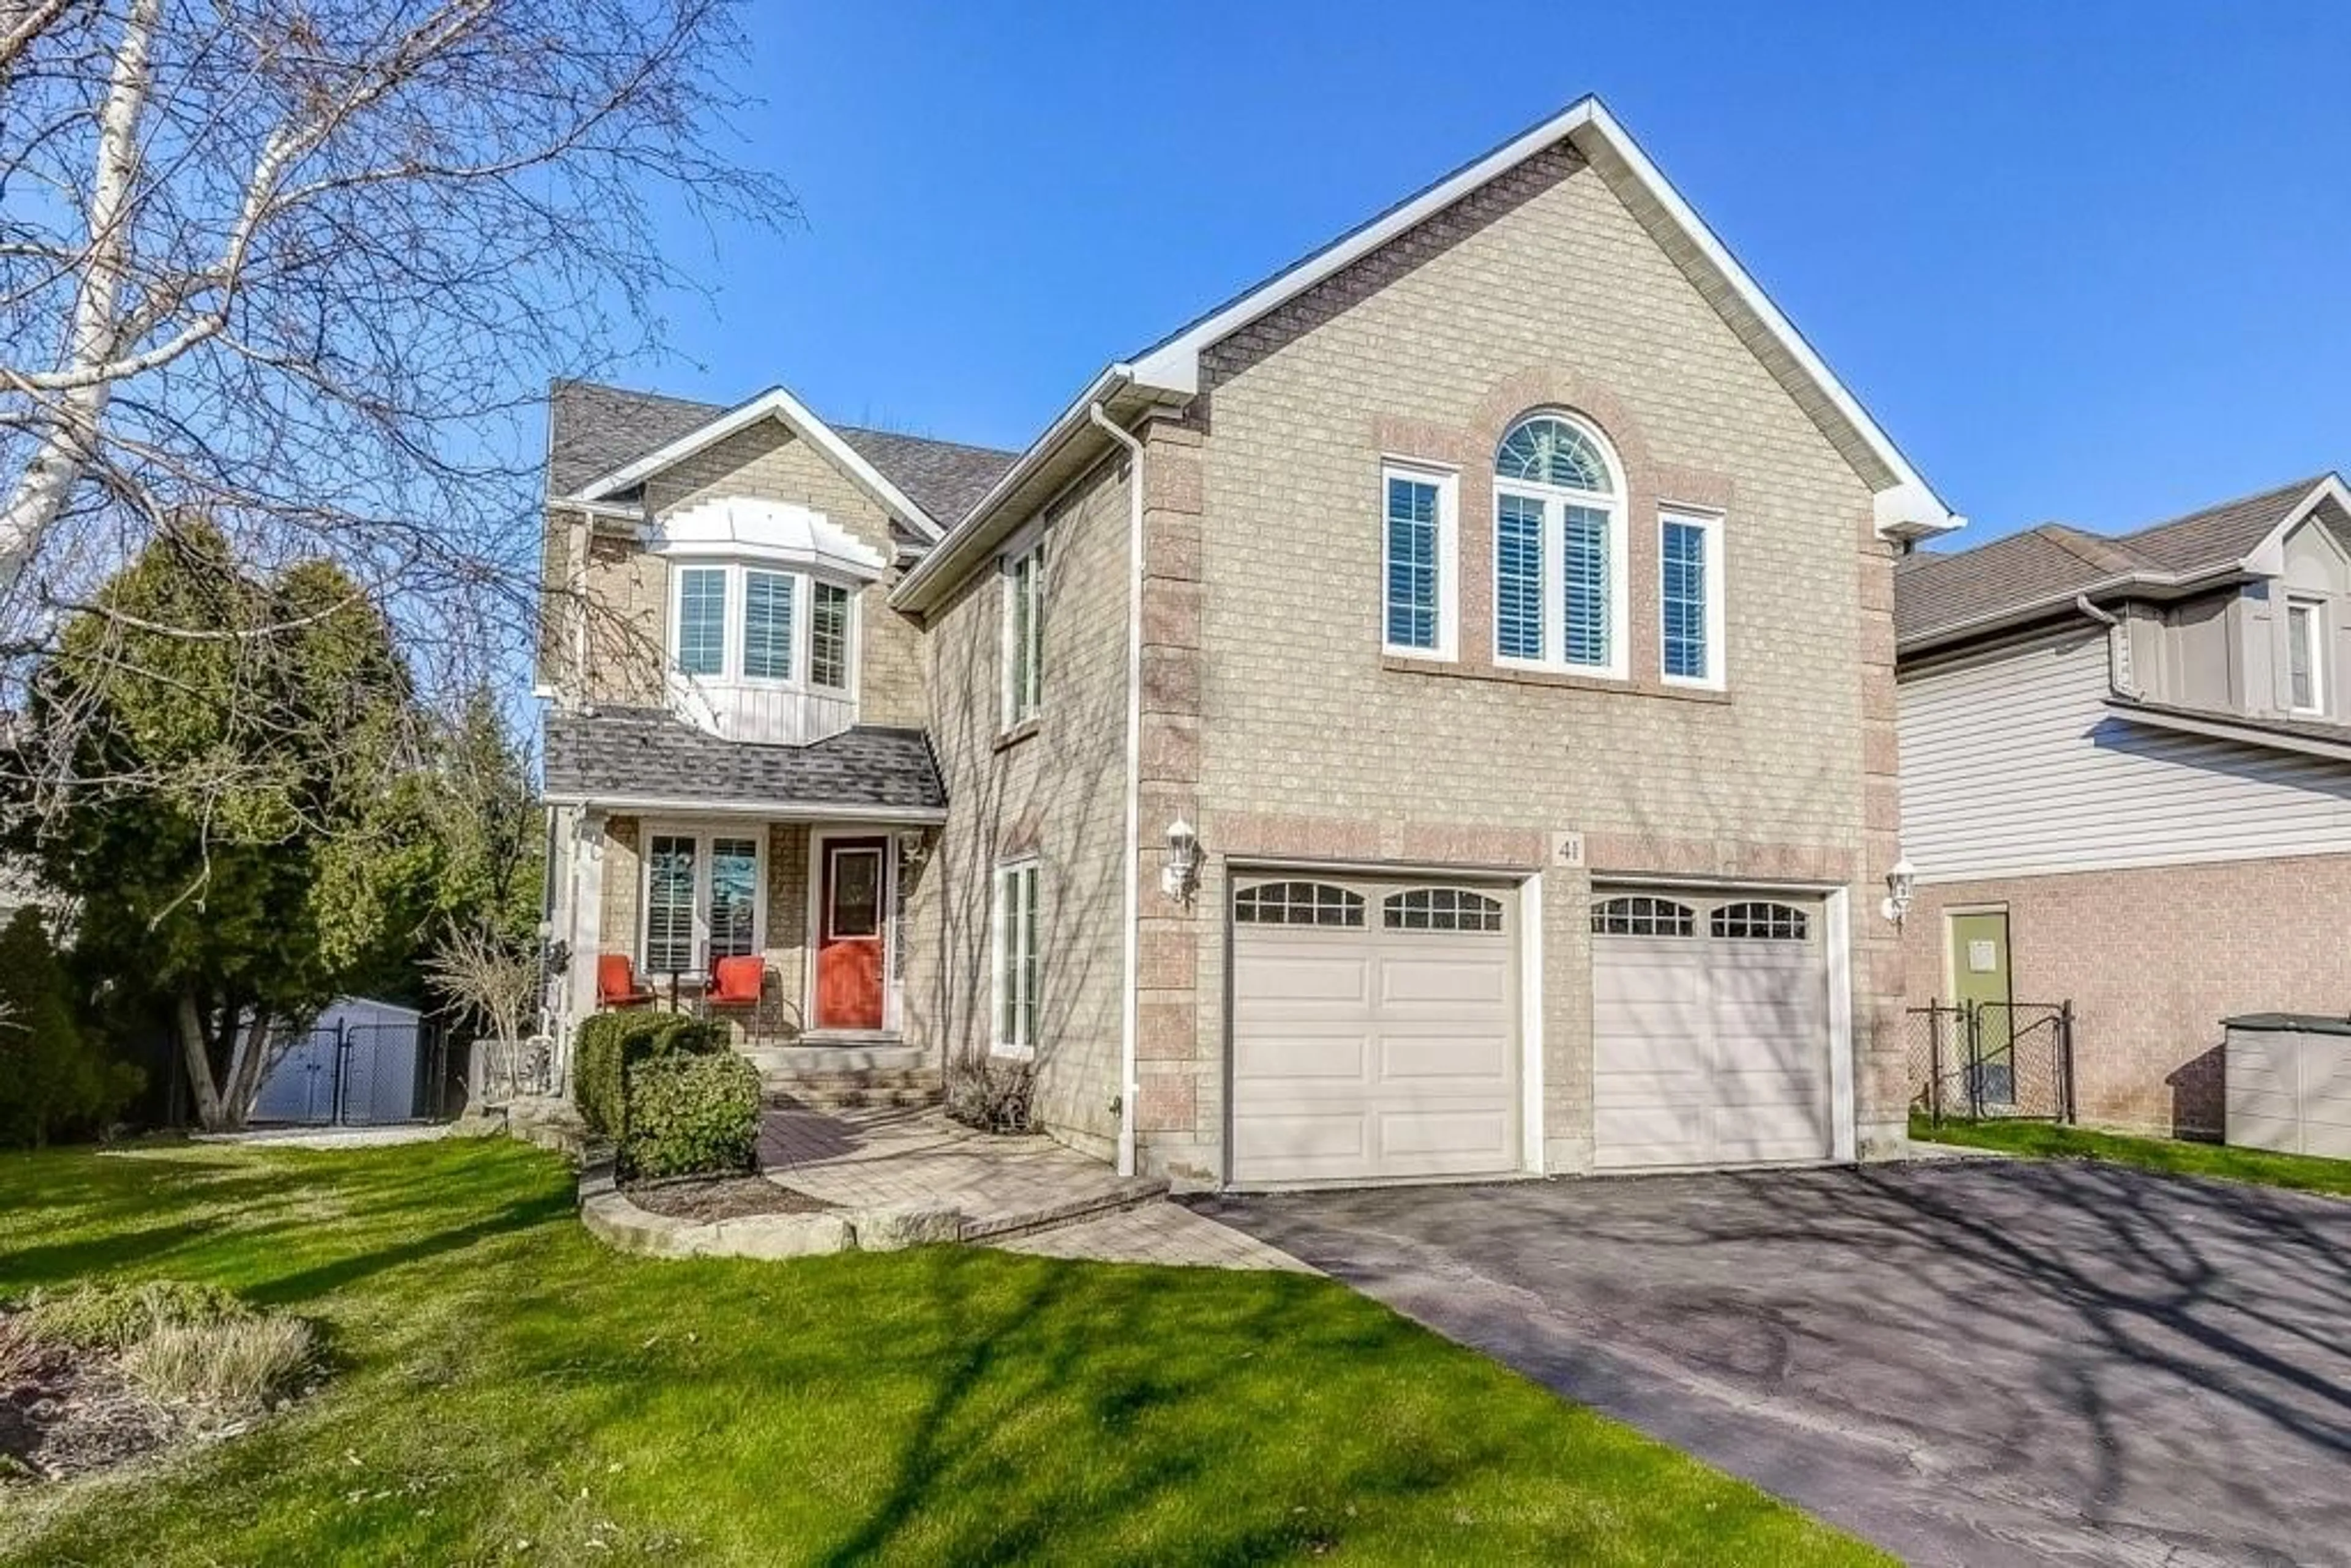 Home with brick exterior material for 41 STRATHROY Cres, Waterdown Ontario L8B 0K9